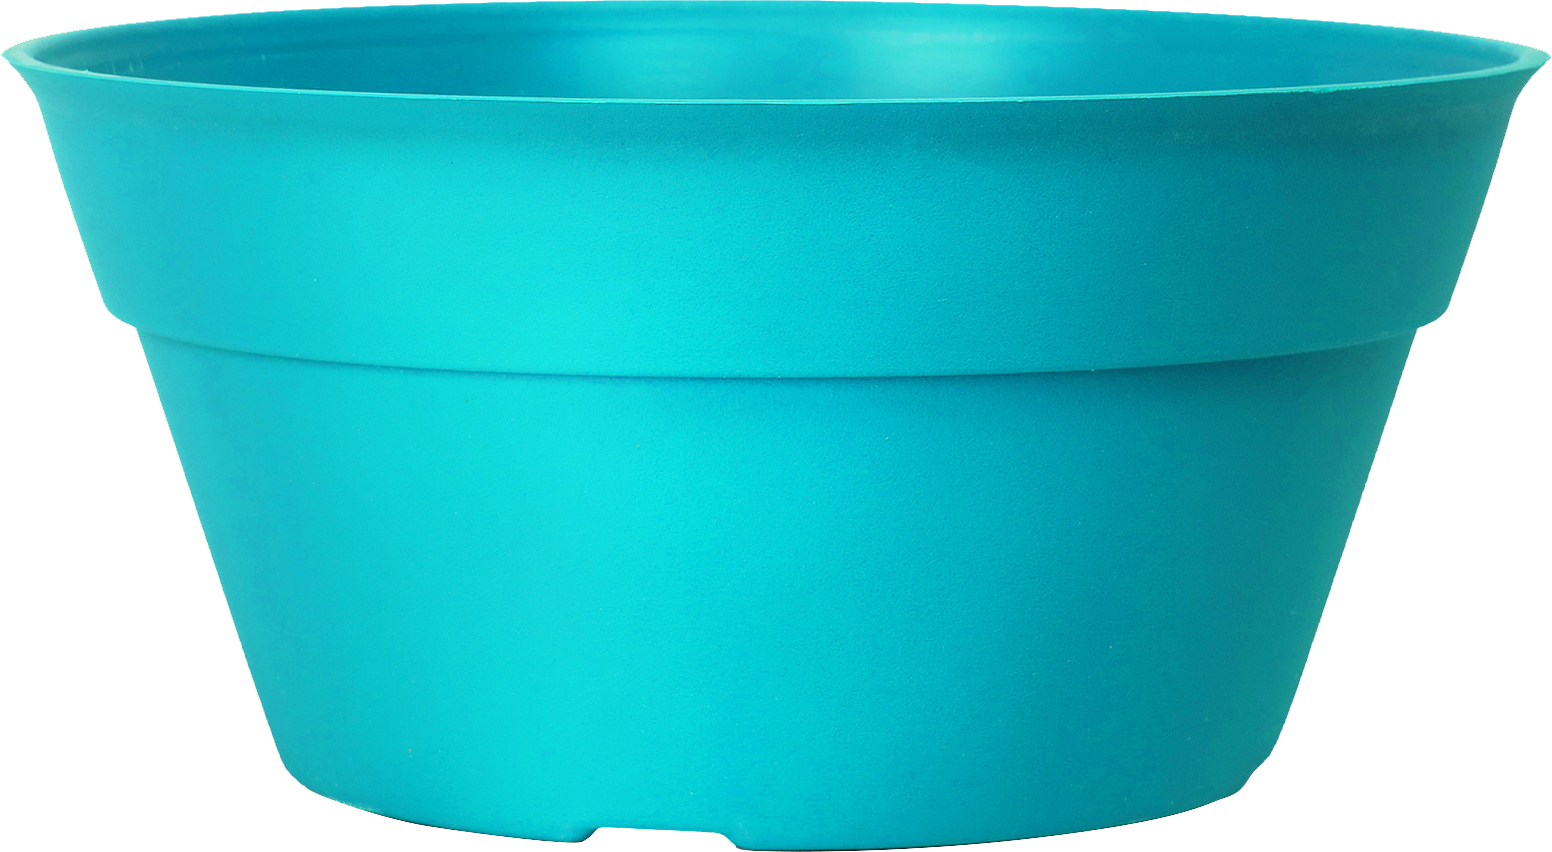 10 Inch Euro Bowl Turquoise Blue - 95 per case